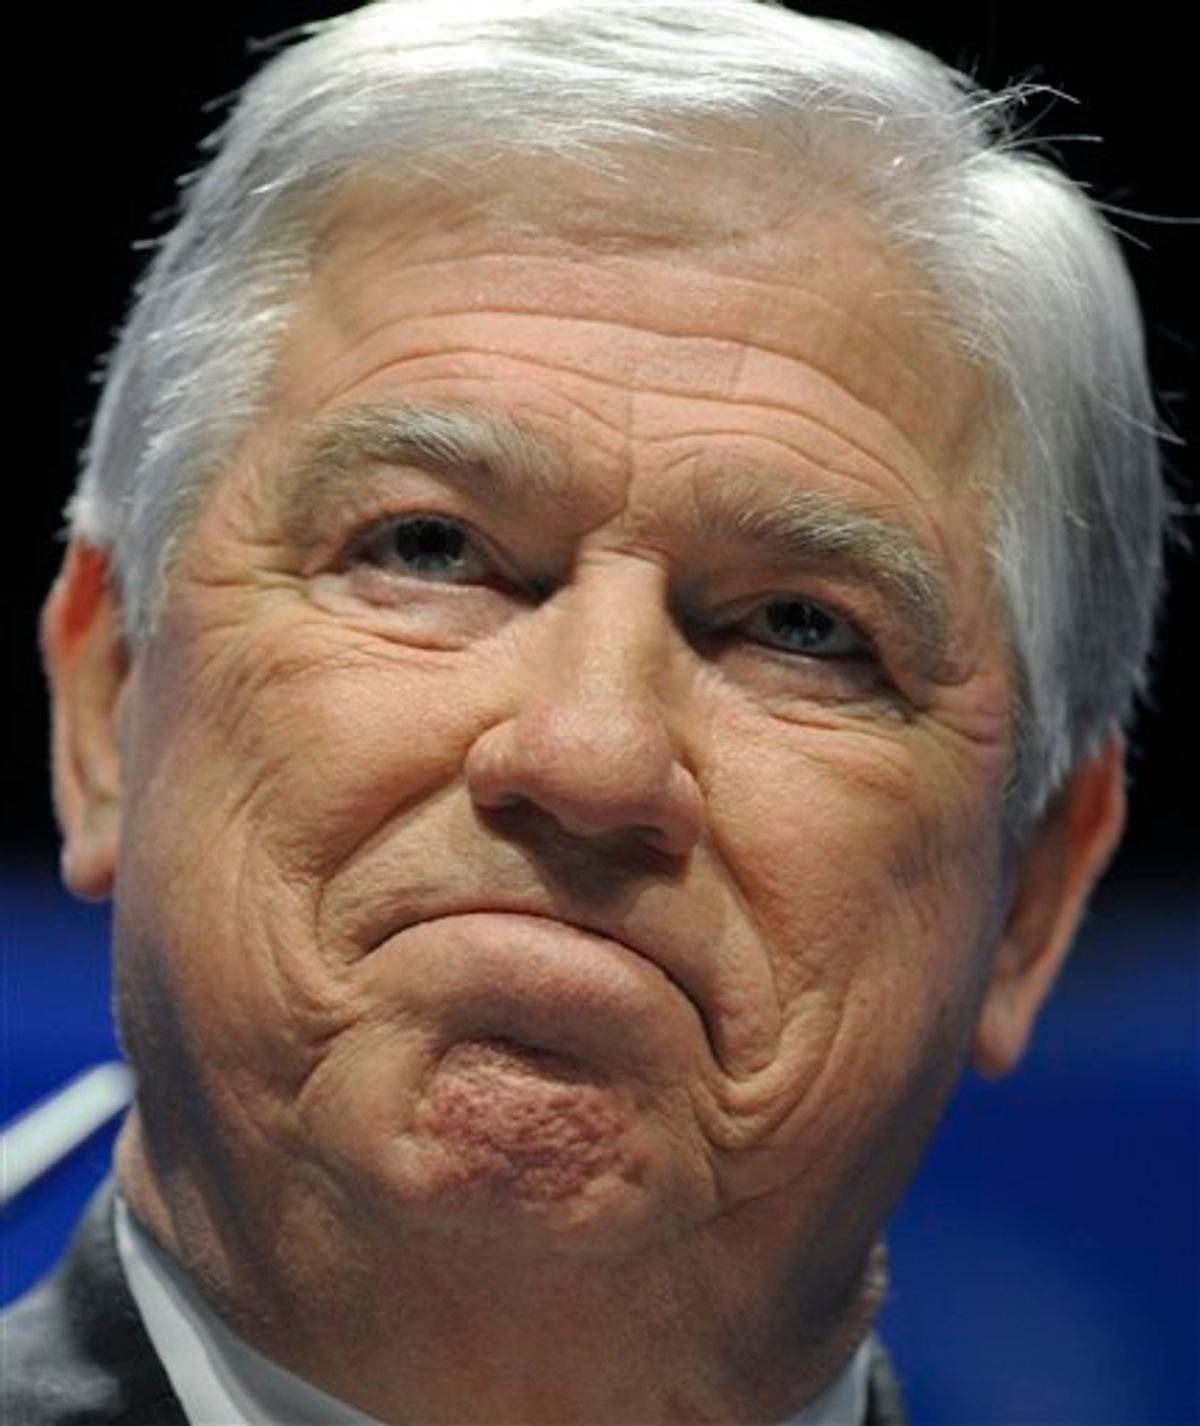 Mississippi Gov. Haley Barbour speaks at the Conservative Political Action Conference (CPAC) in Washington, Saturday, Feb. 12, 2011. (AP Photo/Cliff Owen)    (AP)